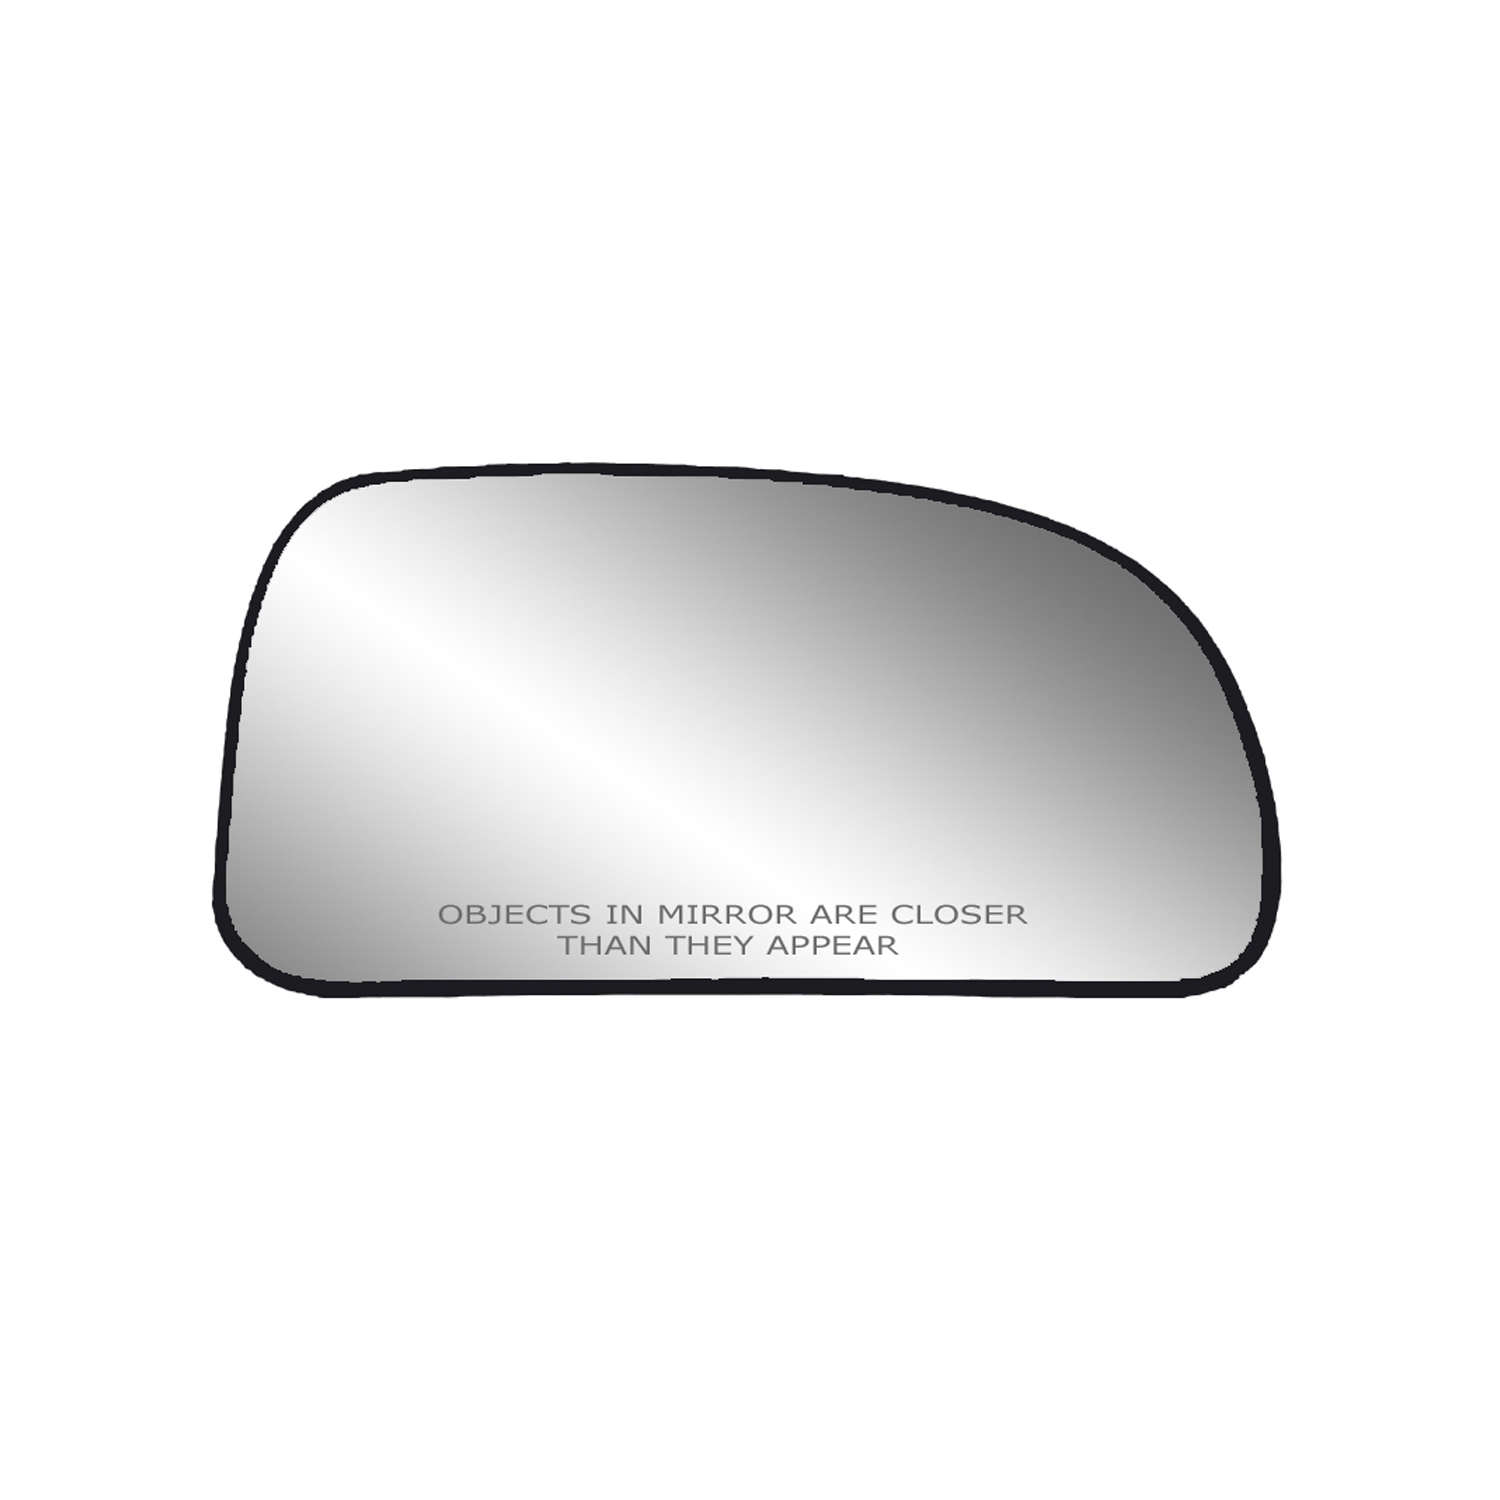 GetAllParts Aftermarket 2004-2007 Buick Rainier Right Door Mirror Glass Assembly Includes Backing Plate w/Heated Glass 88980571